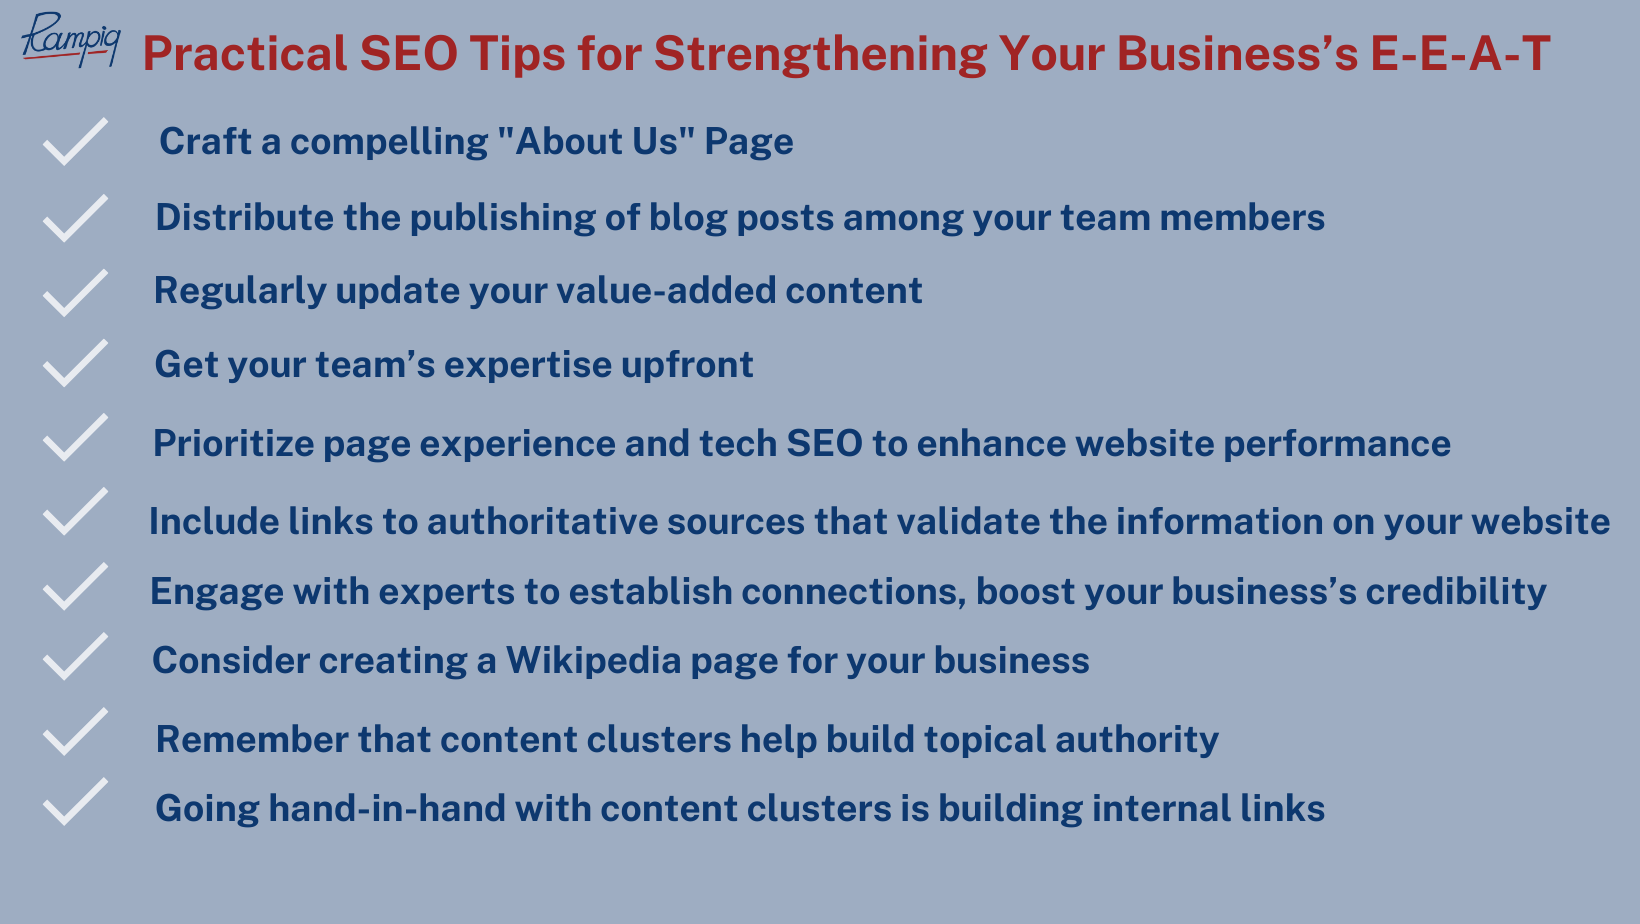 Practical SEO Tips for Strengthening Your E-E-A-T